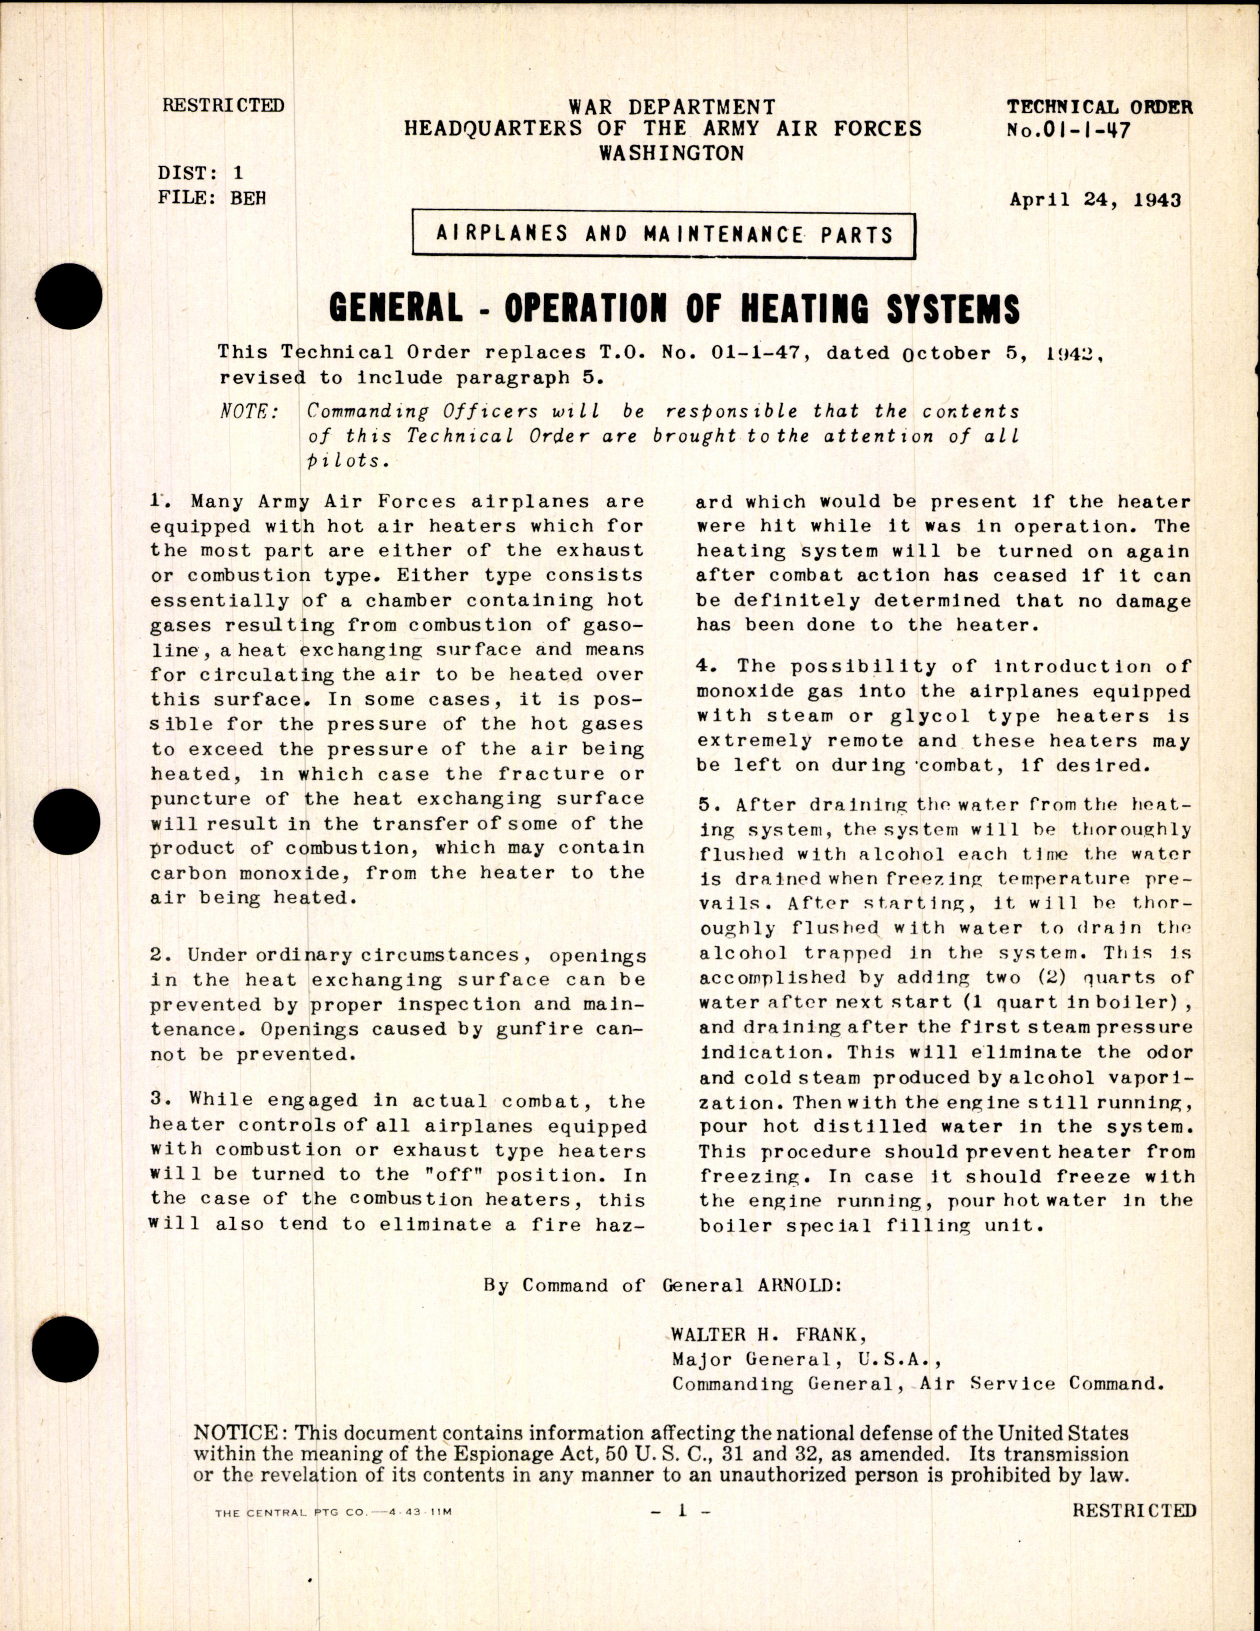 Sample page 1 from AirCorps Library document: Airplanes and Maintenance Parts for General Operation of Heating Systems